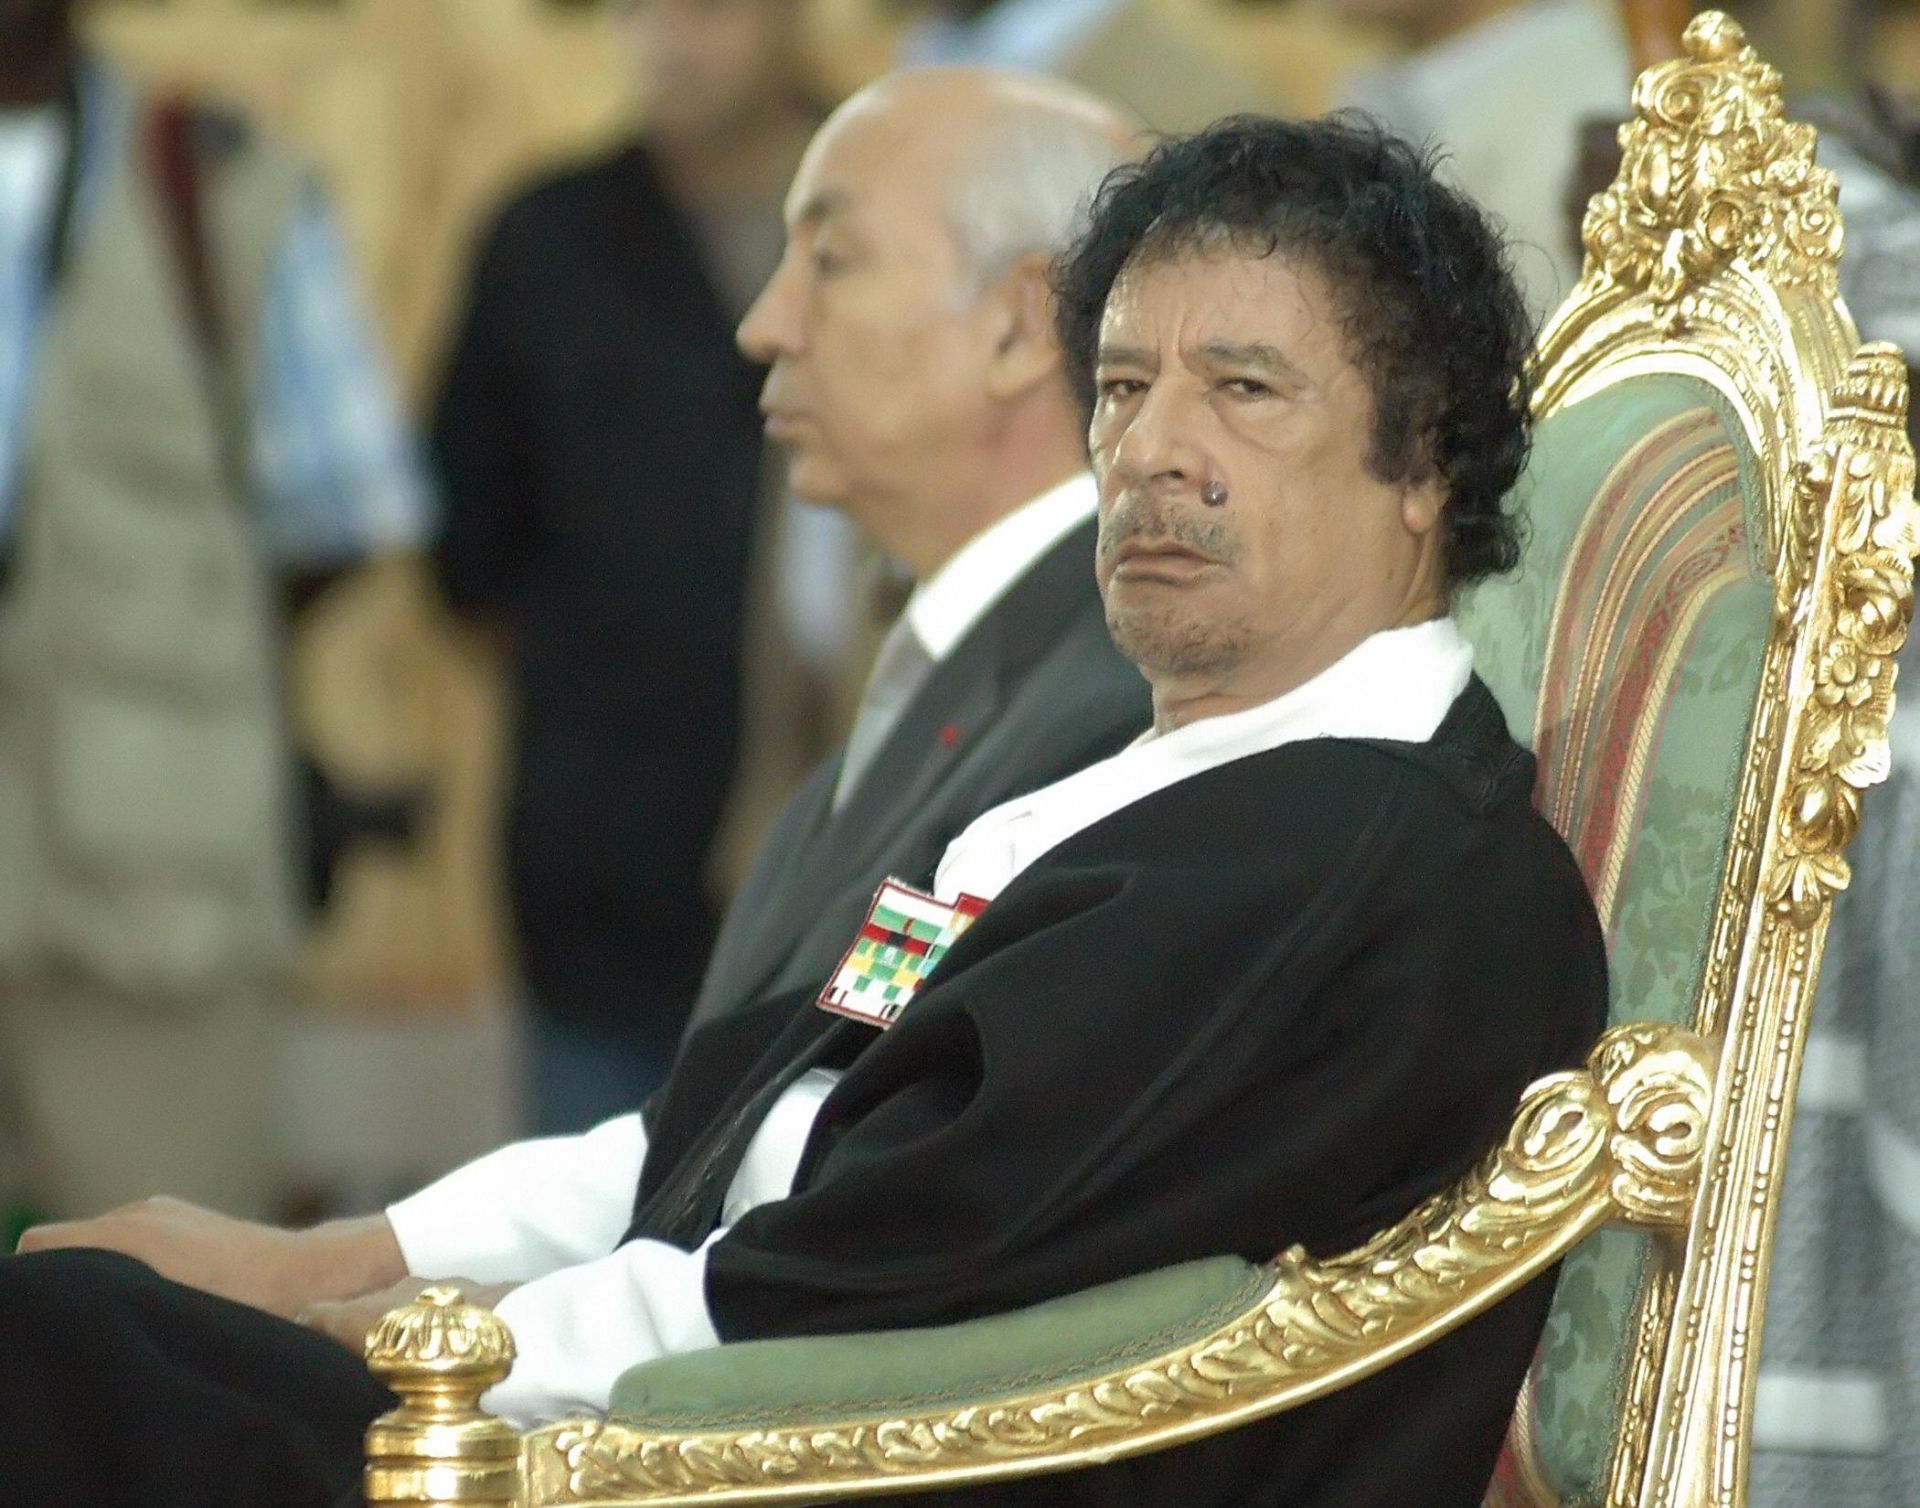 Two Versions of the Past Battle for Libya’s Future